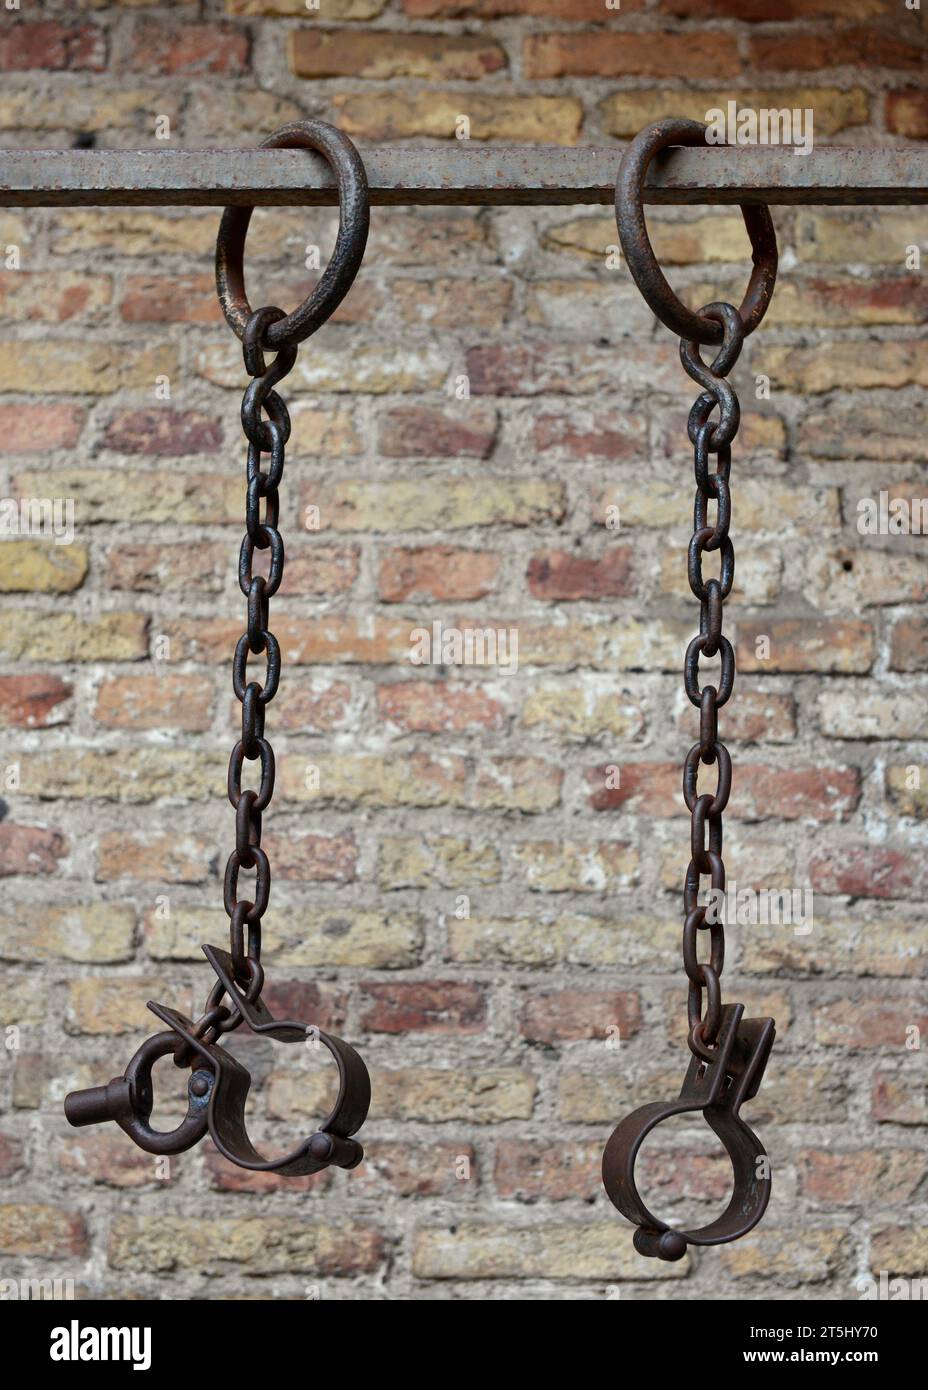 Pair of medieval wrist shackles or ancient iron handcuffs with chains at the Foregate Complex Museum or Zespół Przedbramia in Gdansk, Poland Stock Photo